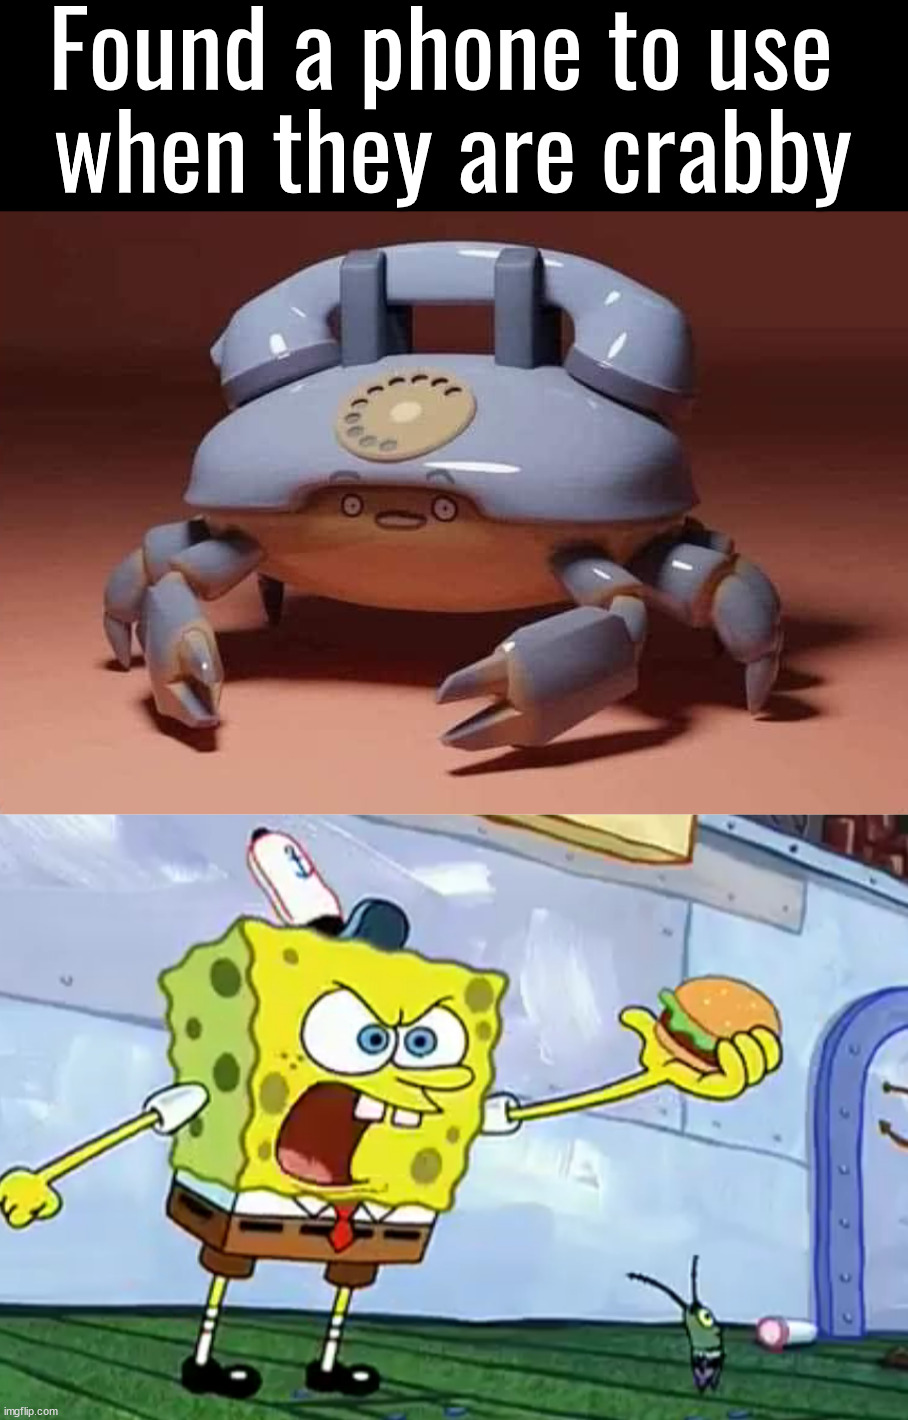 Good for yelling into | Found a phone to use 
when they are crabby | image tagged in and the next day,krabby patty,crabs,phone,cool stuff | made w/ Imgflip meme maker